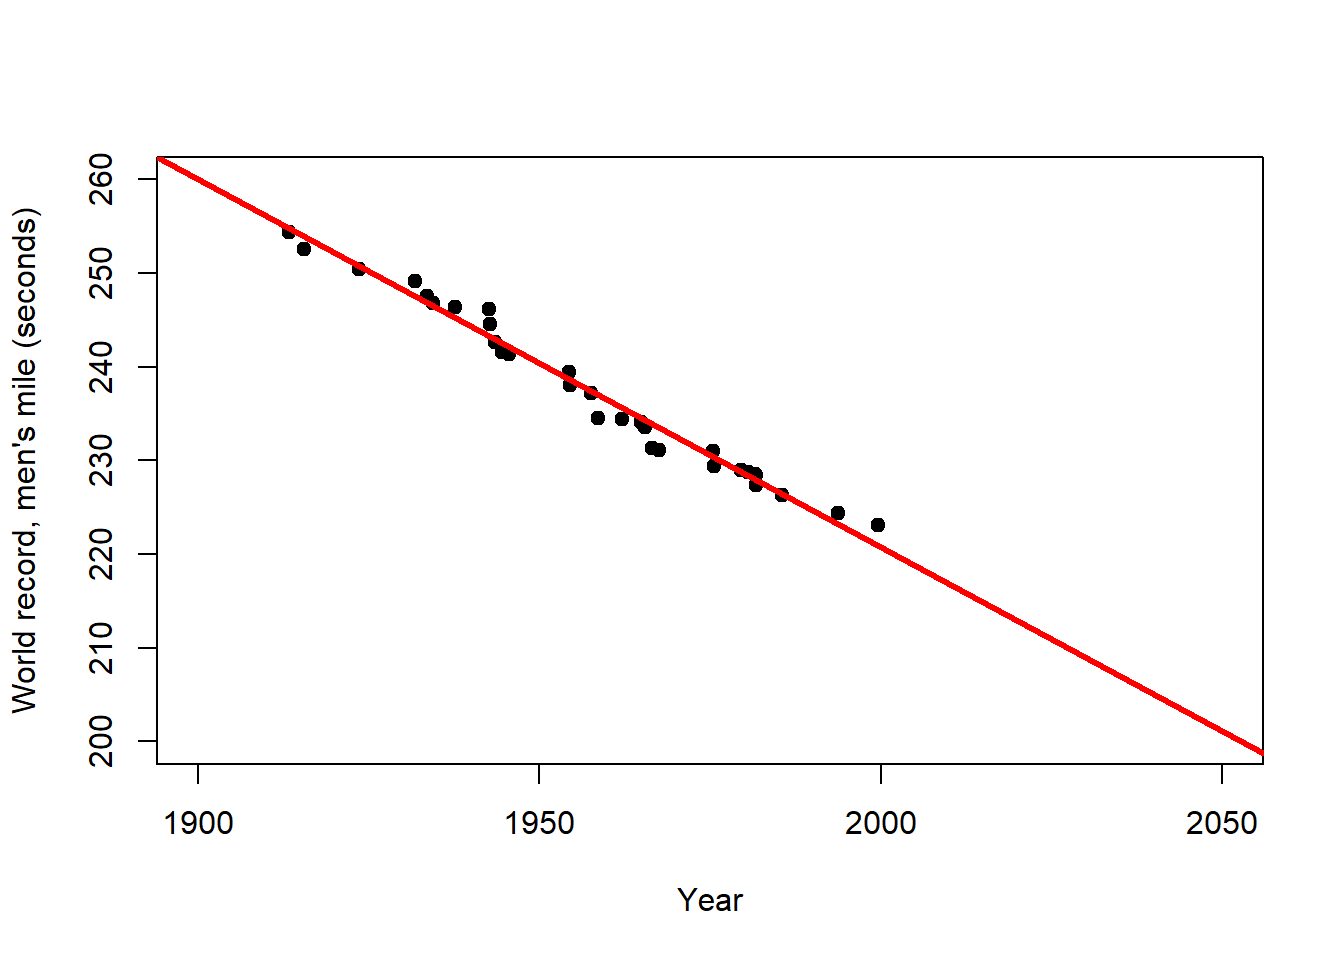 Left: Trend of the world record for the men`s mile over the first half of the 20th century (description). Centre: Extrapolation of this trend over the 2nd half of the 20th century (prediction). Right: Extrapolation of the overall trend until the year 2050 (longer prediction). After: @wainer2009